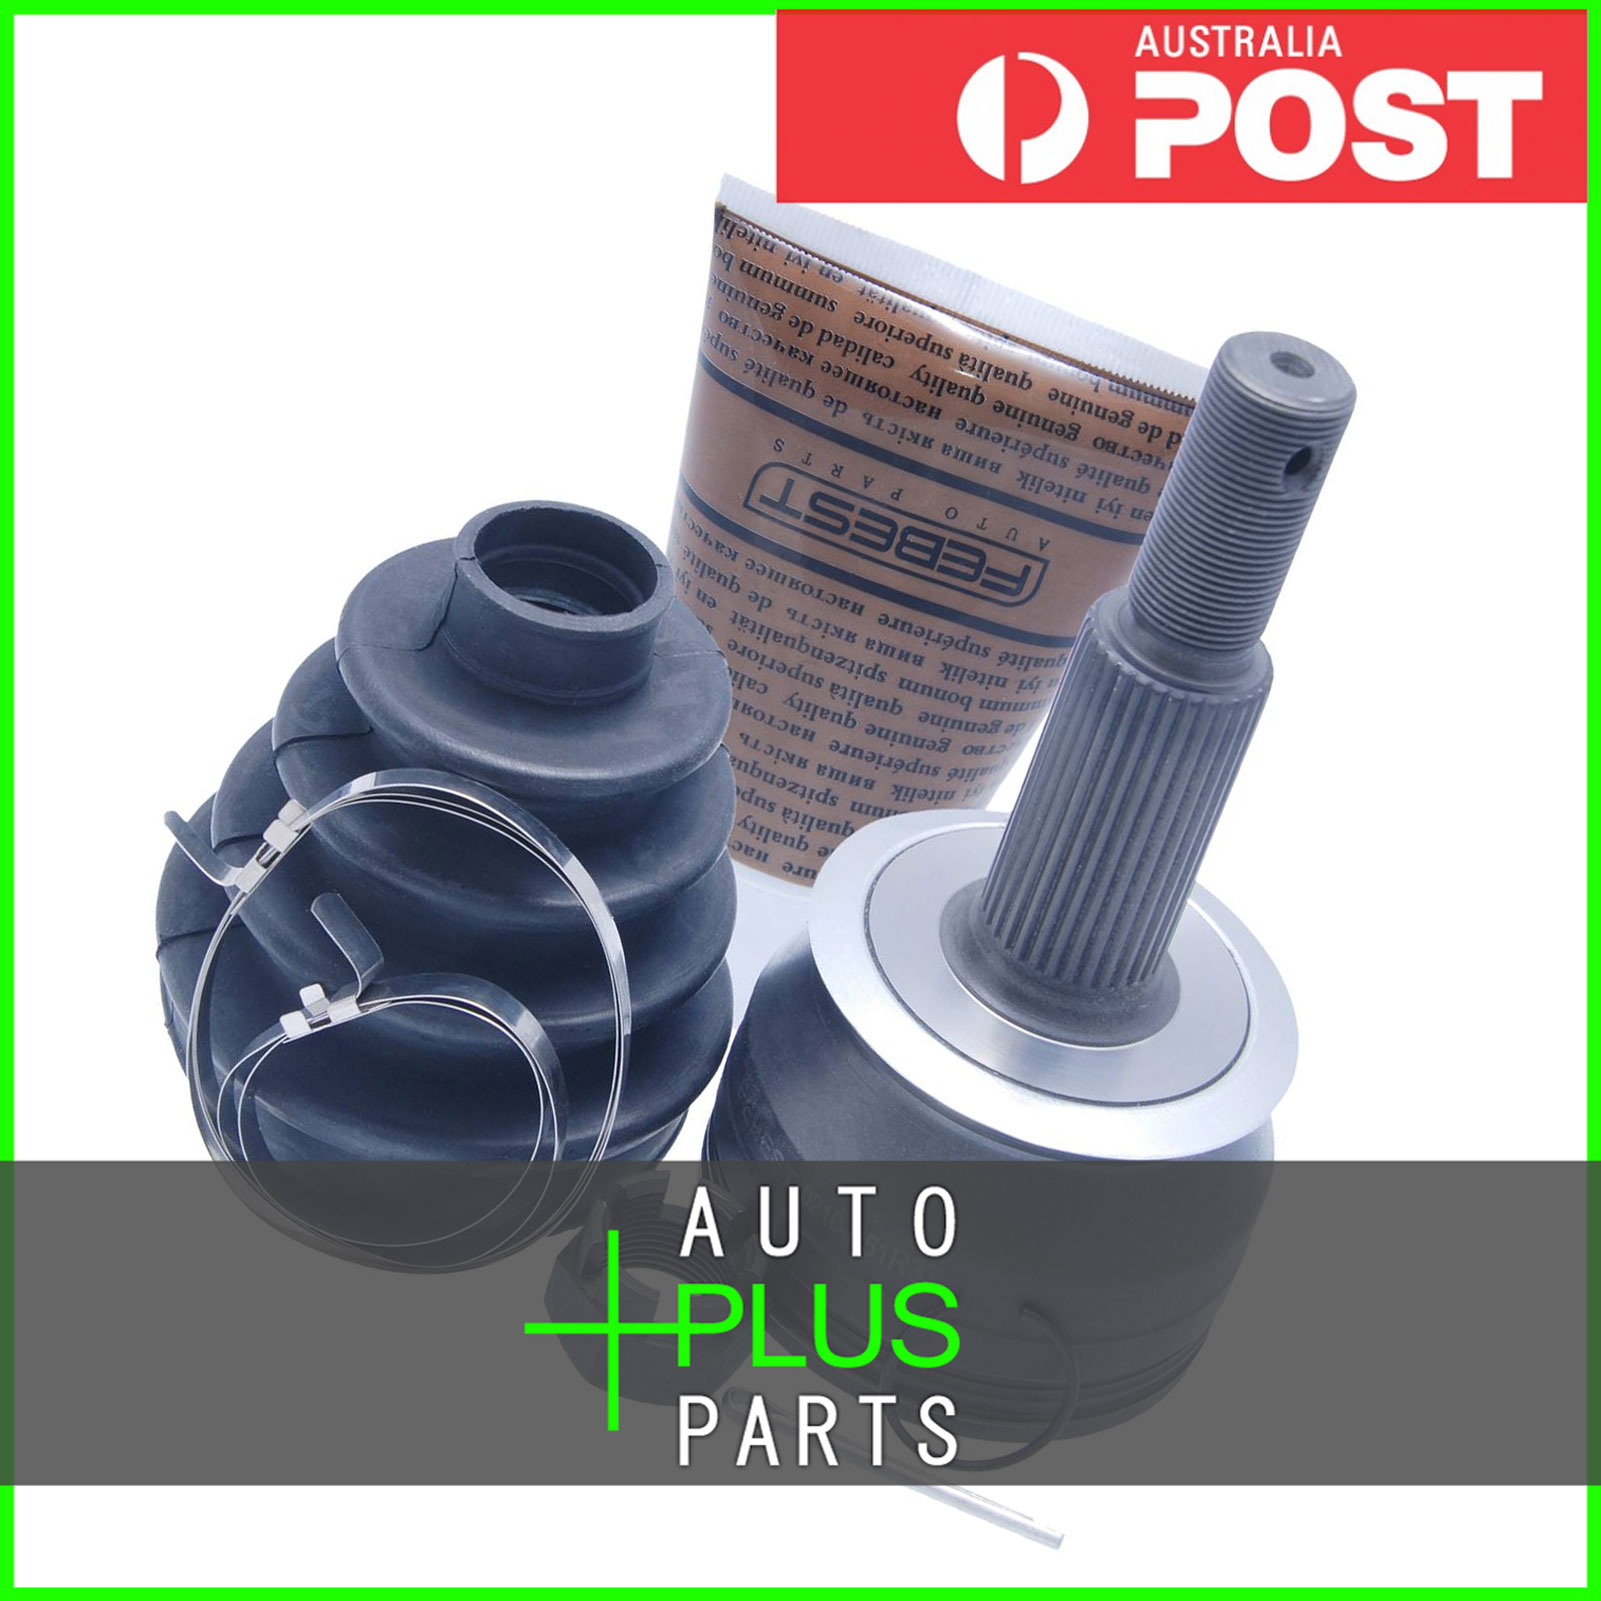 Fits NISSAN PATHFINDER - OUTER CV JOINT REAR 37X67X32 | eBay